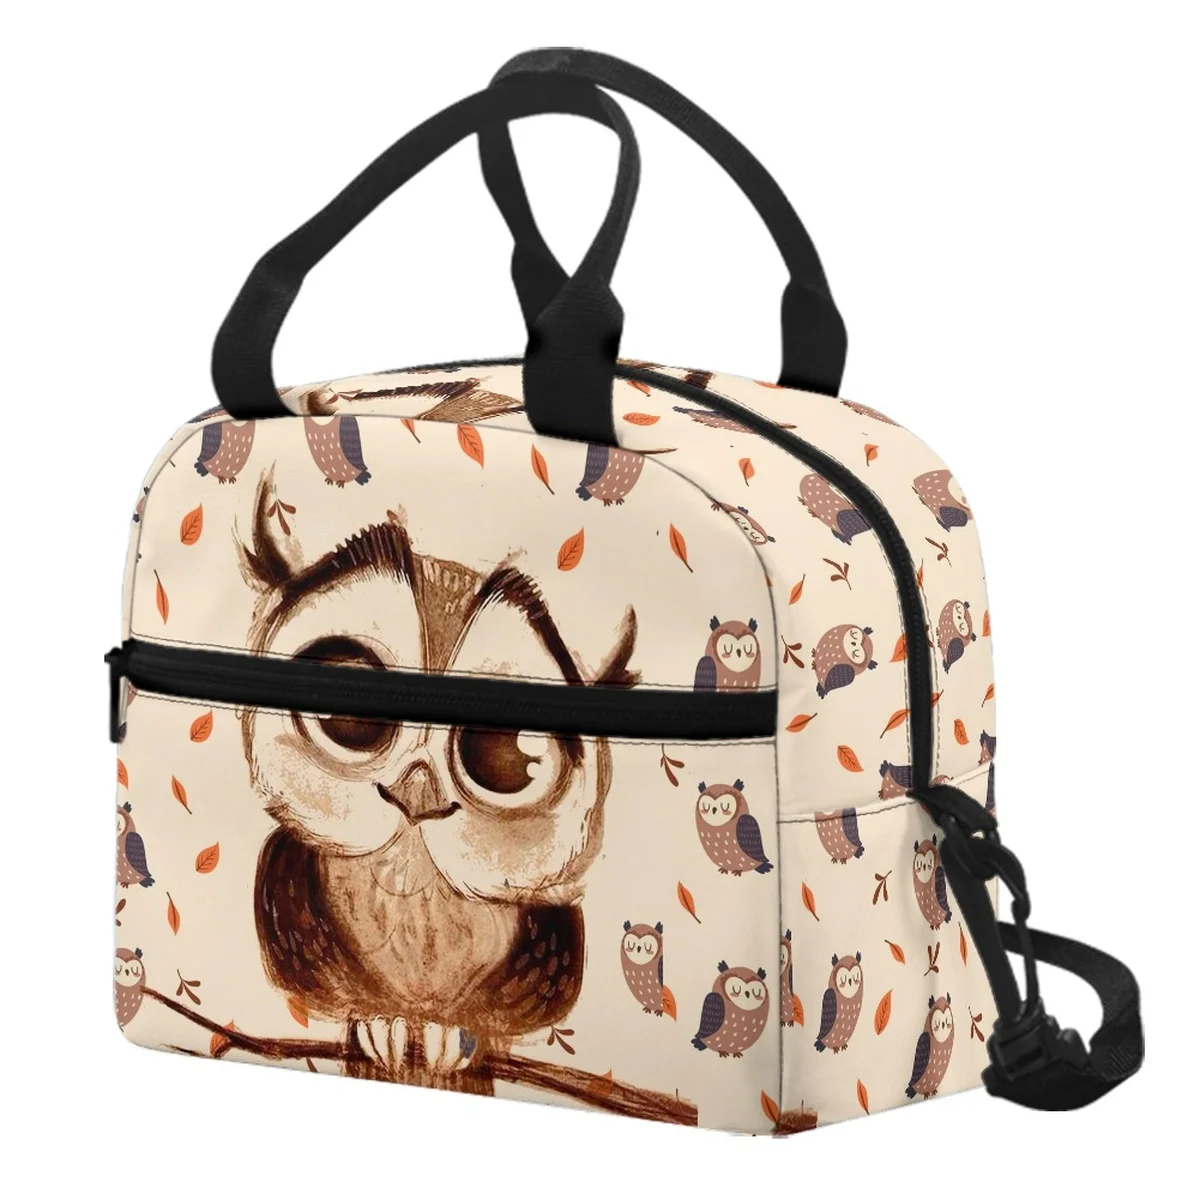 

Coloranimal Cute Cartoon Owl Prints Oil-proof Washable Elderly Working Warm Tote Warm Bento Box Large Zipper School Thermo Pouch